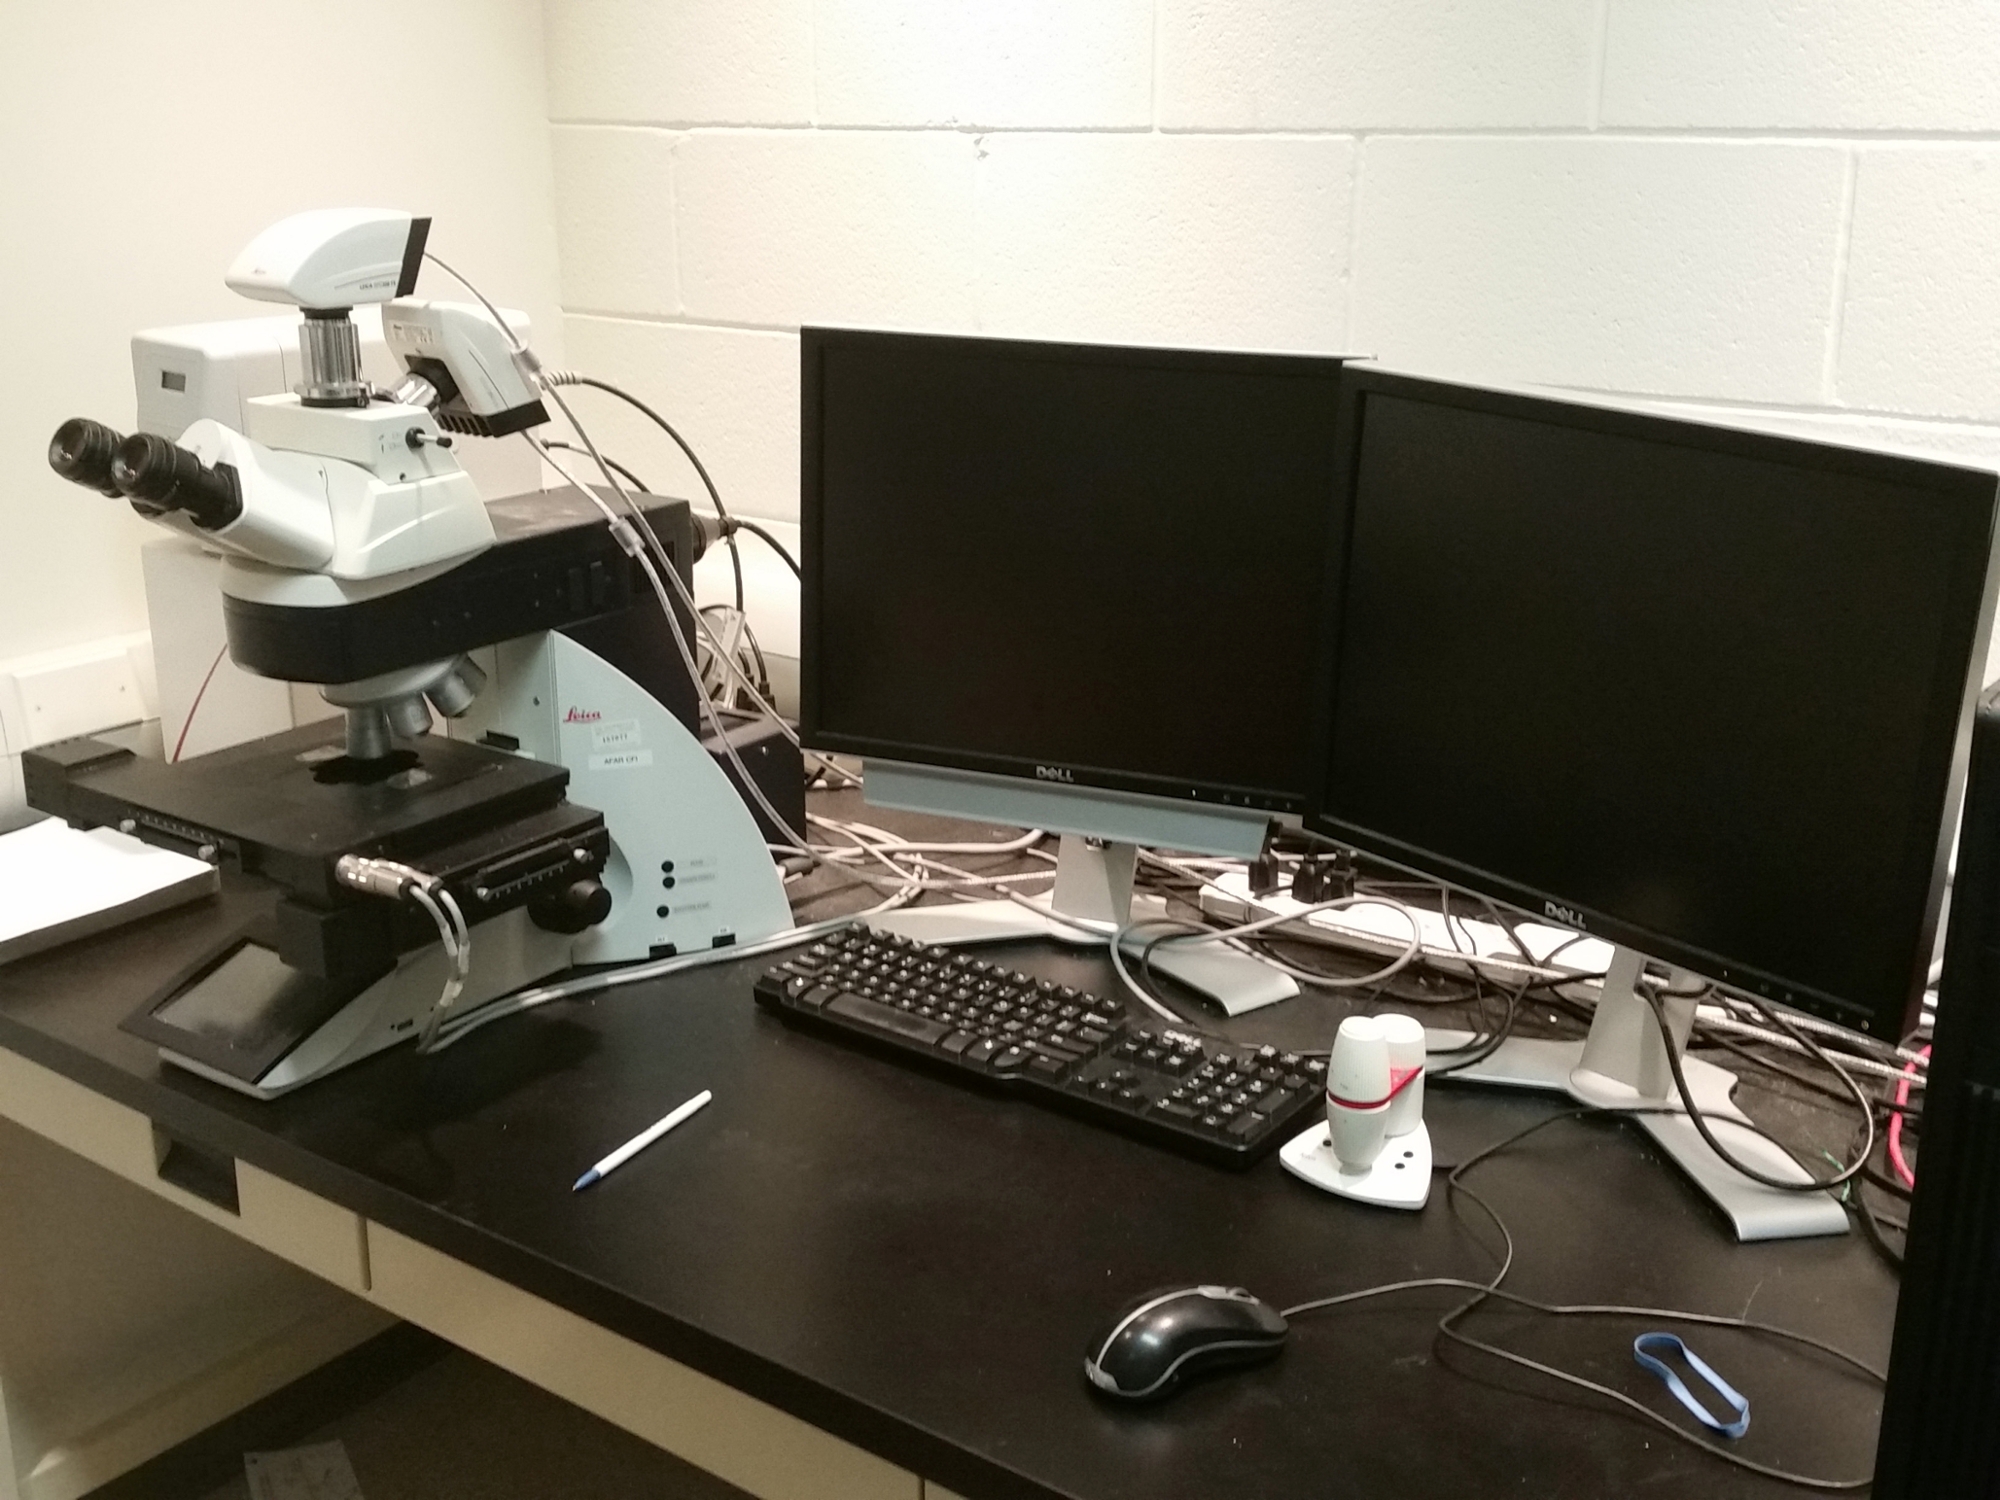 Picture of the microscope suite